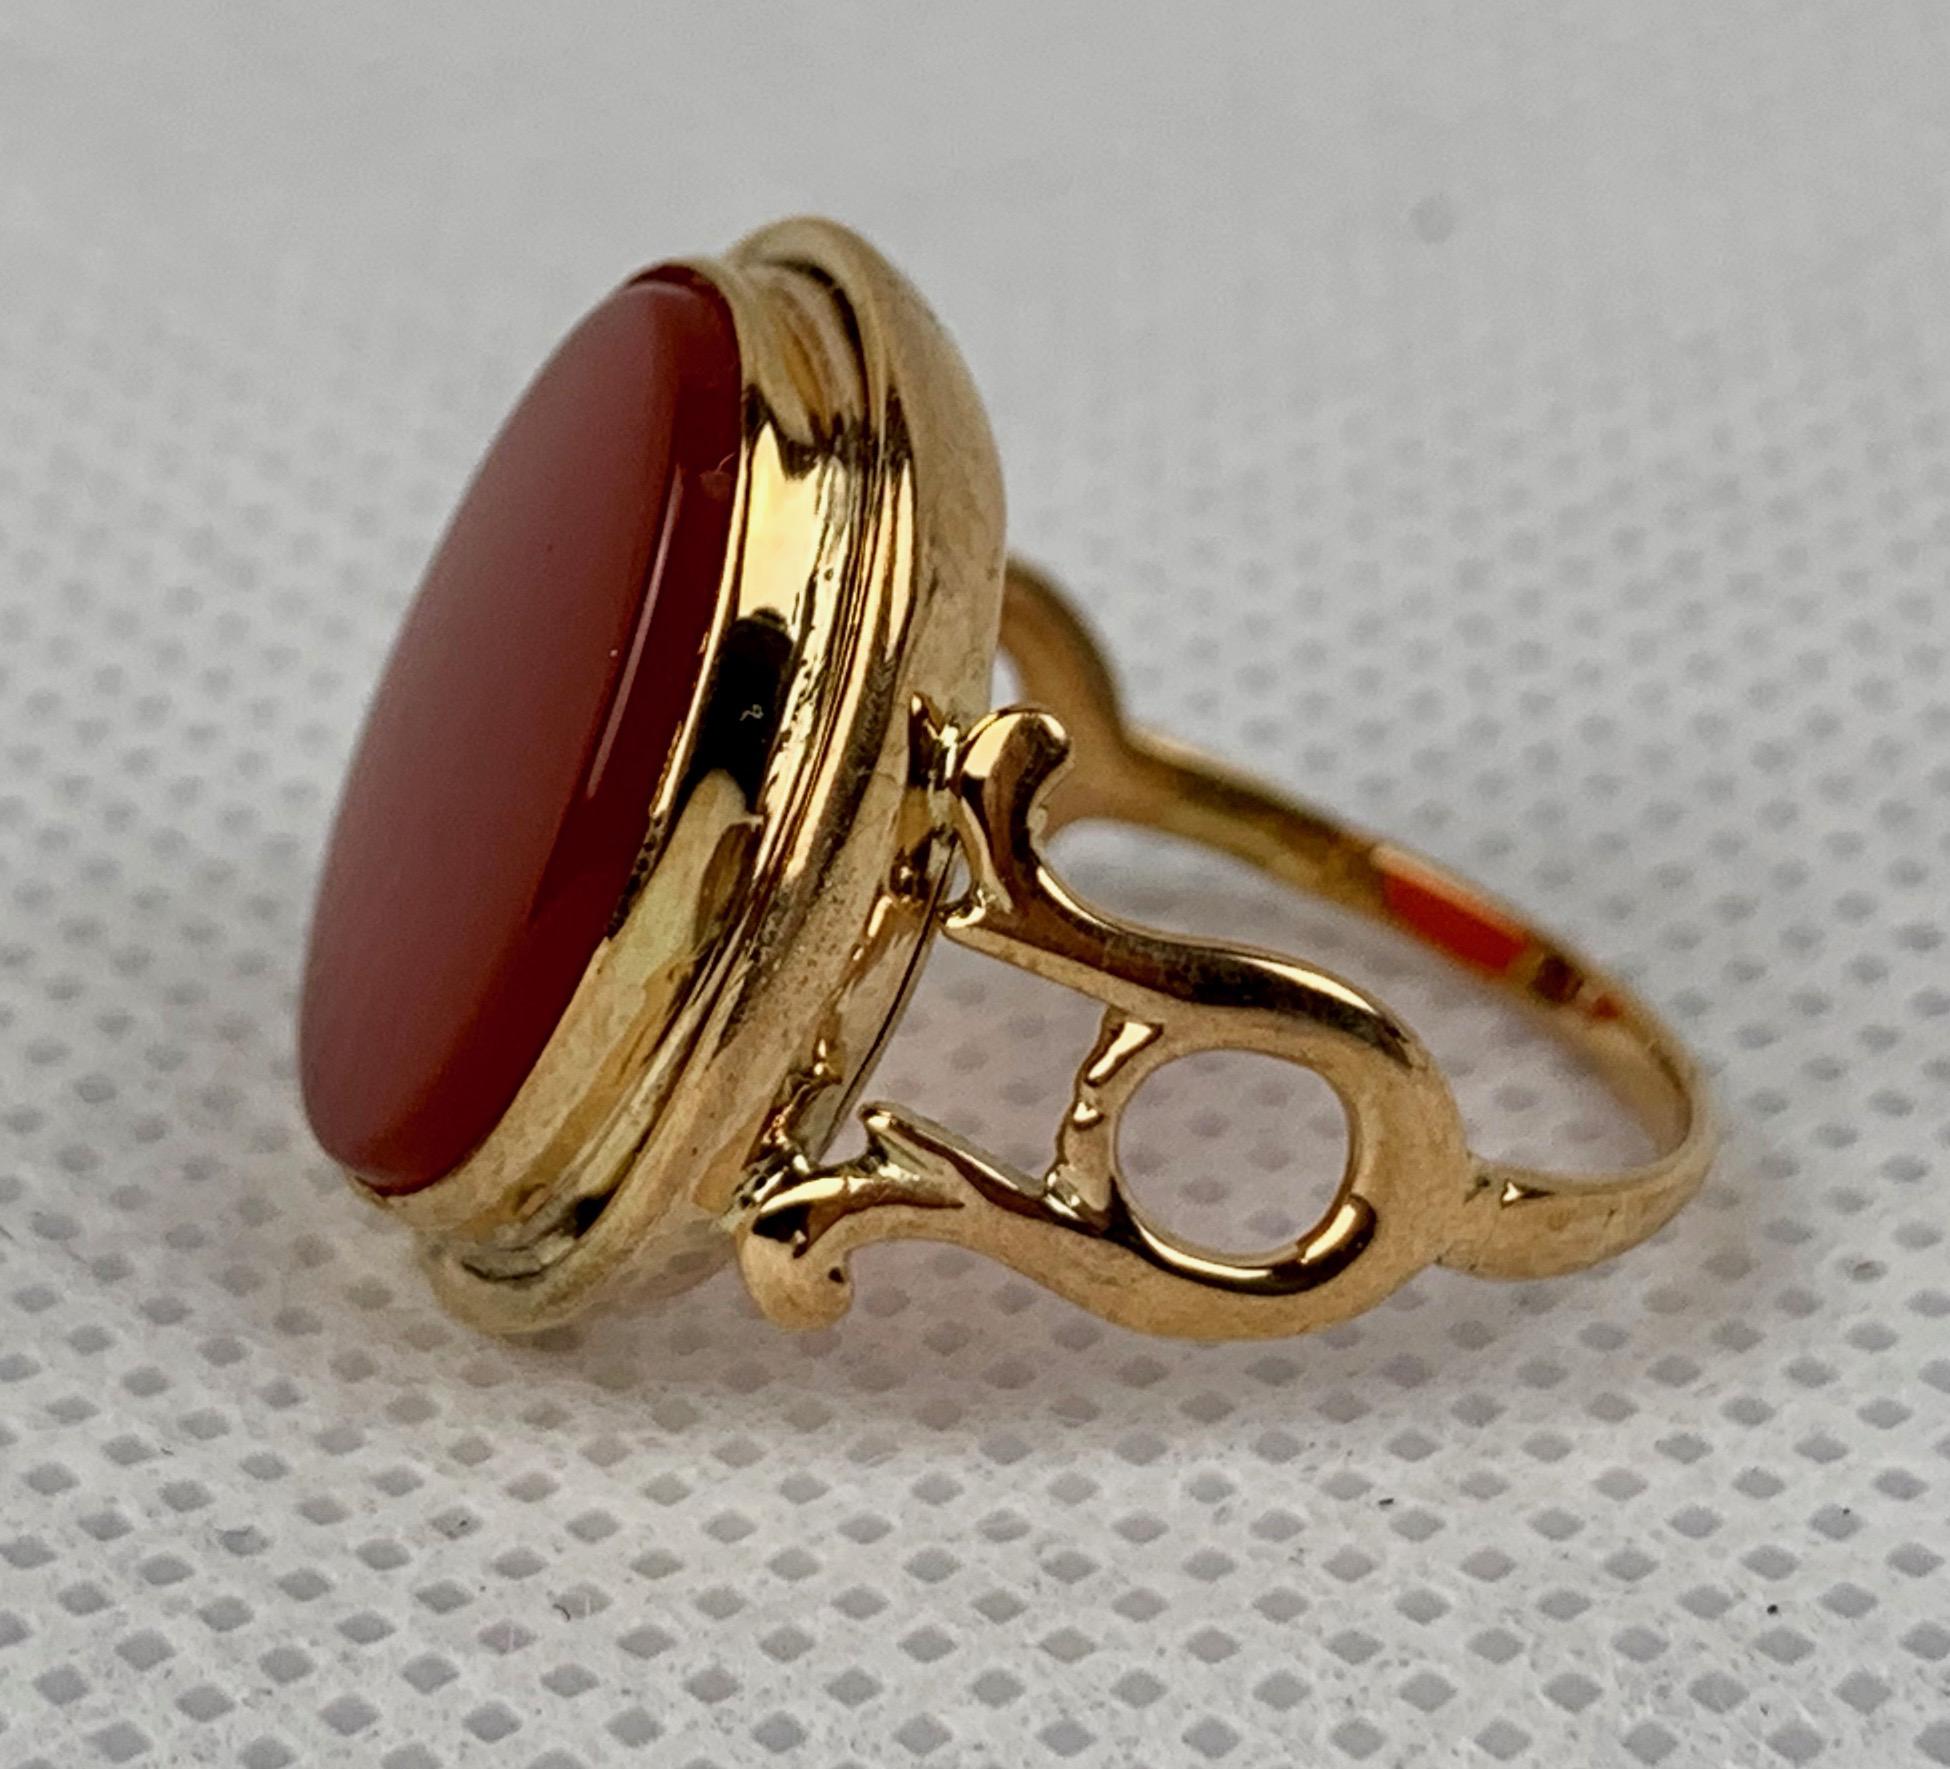 Oval carnelian set into a 14k yellow gold vintage classic ring.  The shank is stylishly simple forming a yoke on each side of the ring and then a circle to grace the finger.  Appropriate for a man or a woman.
Professionally hand polished and